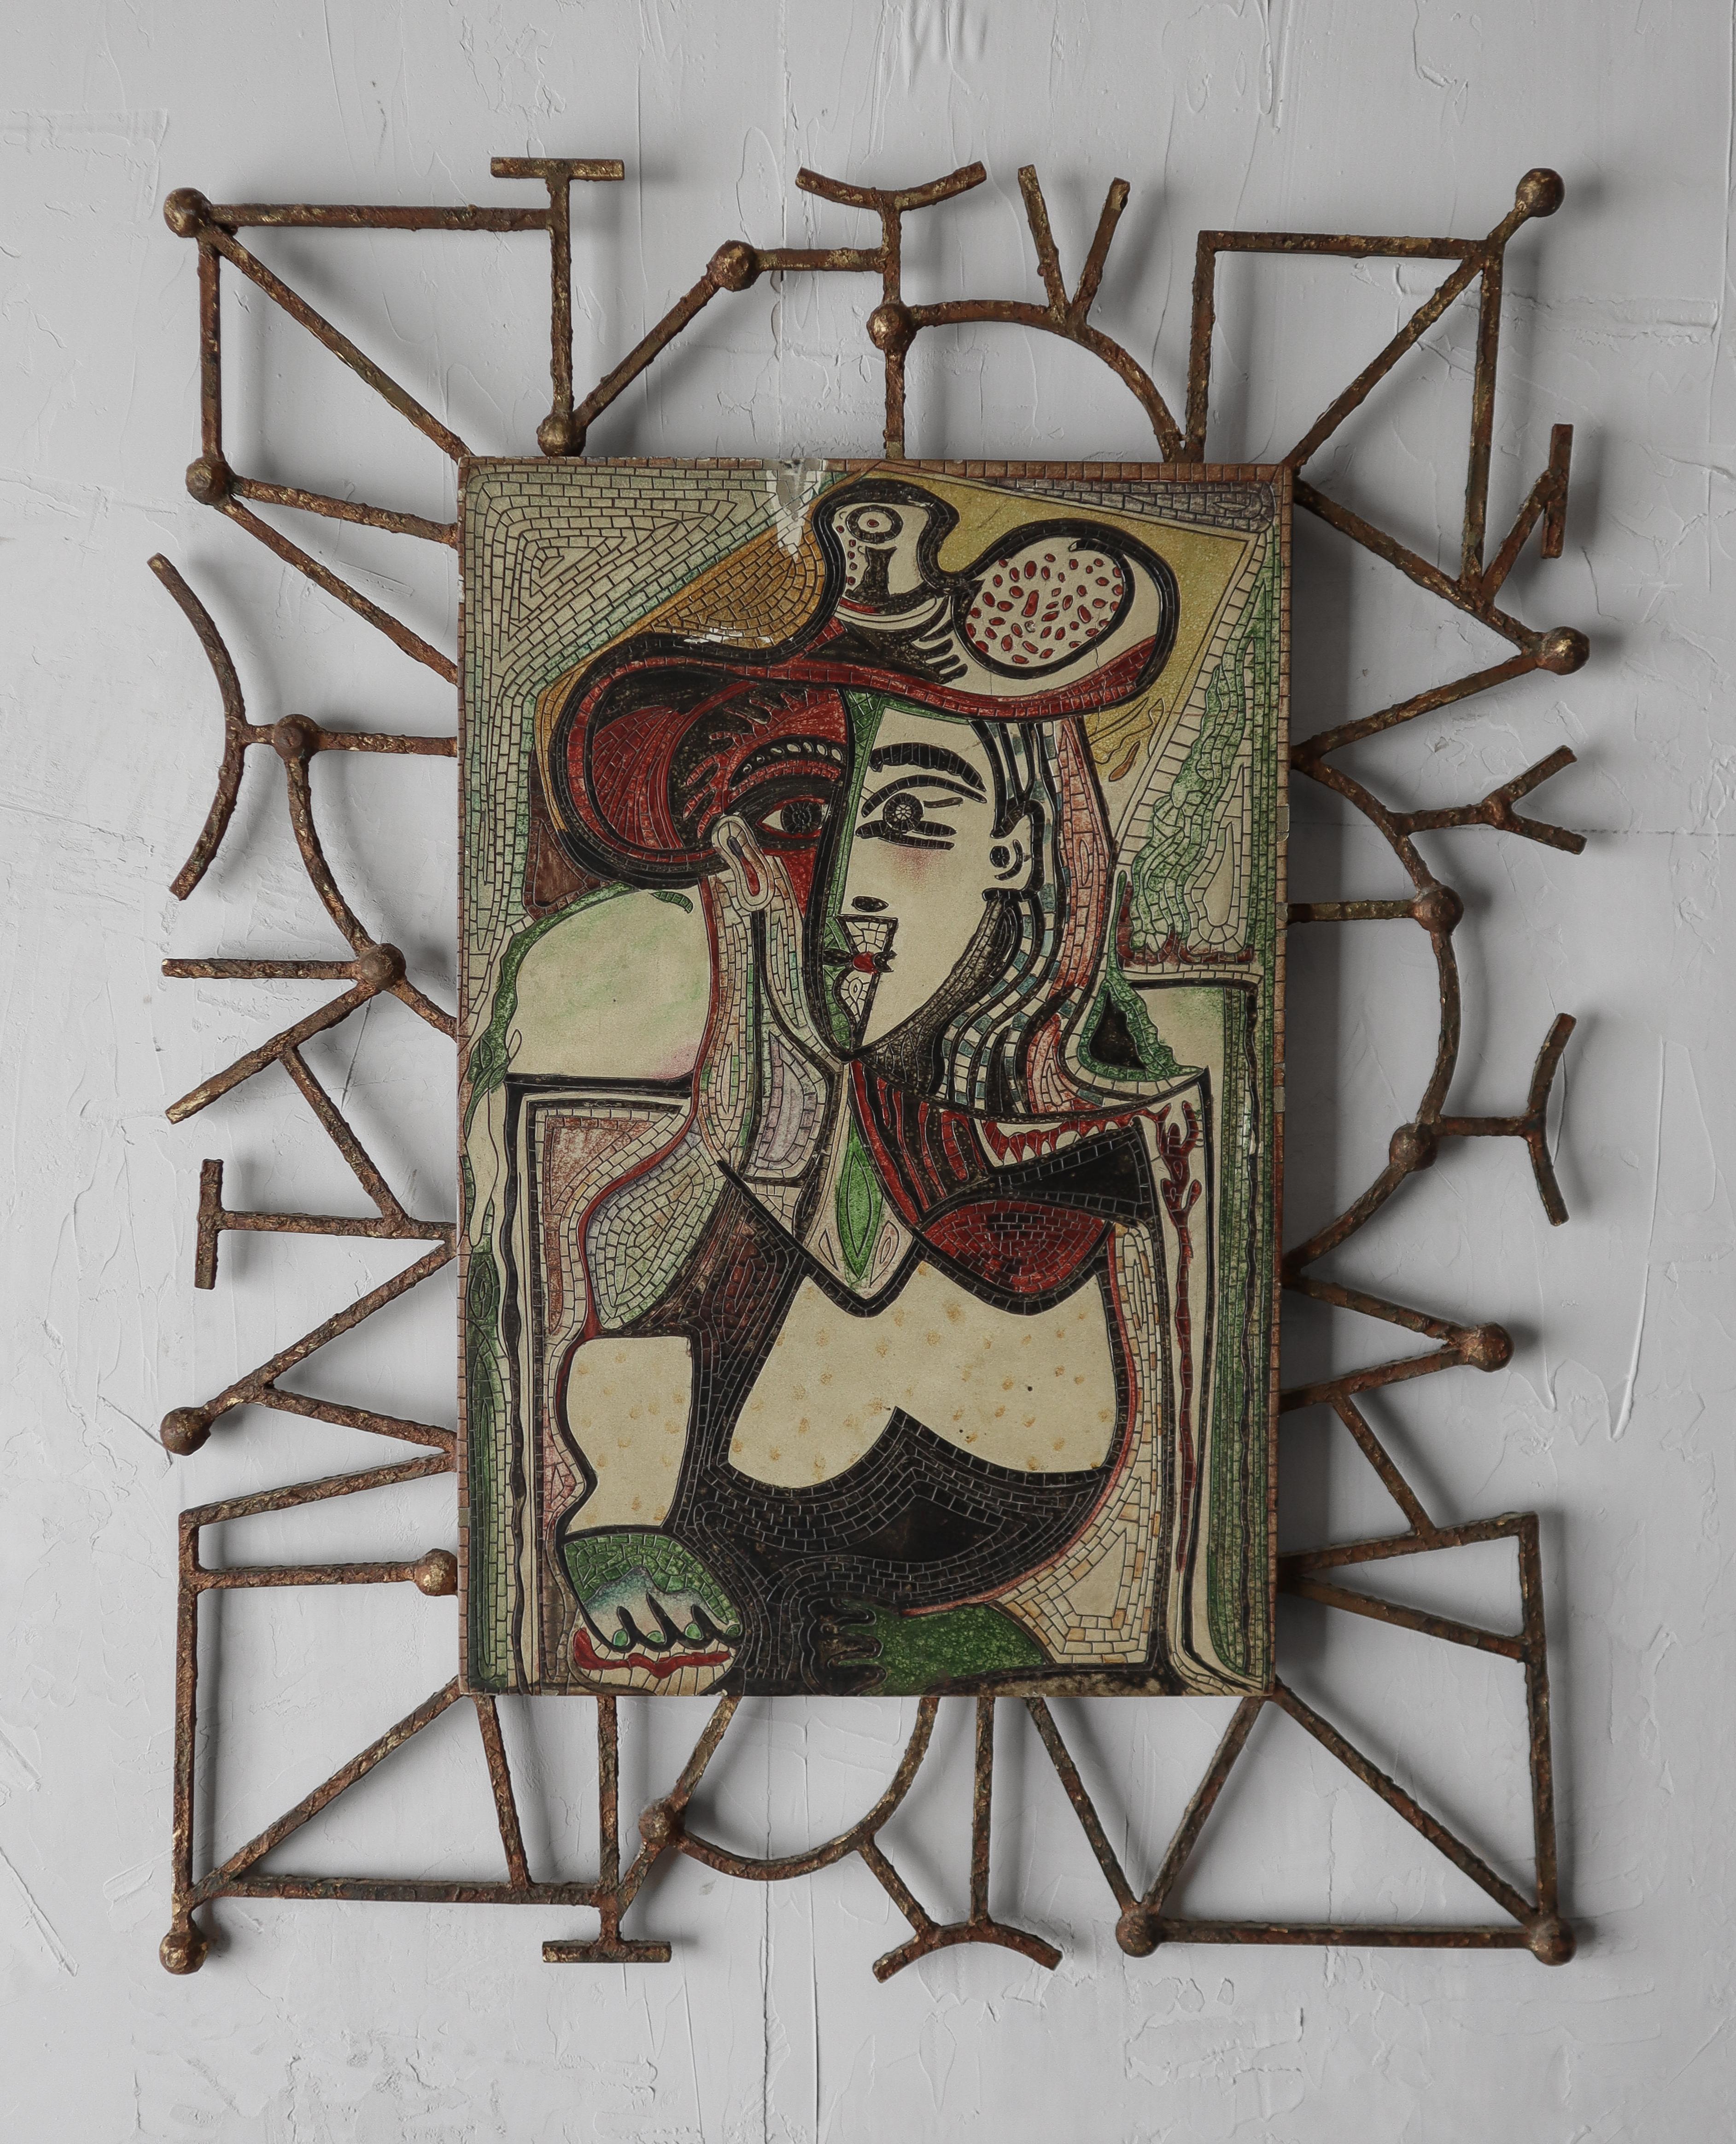 Unique art piece after Pablo Picasso, Woman With a Large Hat.  

Large ceramic tile, carved and painted to look like a mosaic mounted in a brutalist style metal frame.

*2nd Smaller piece also available, see last image

Art piece is in good overall